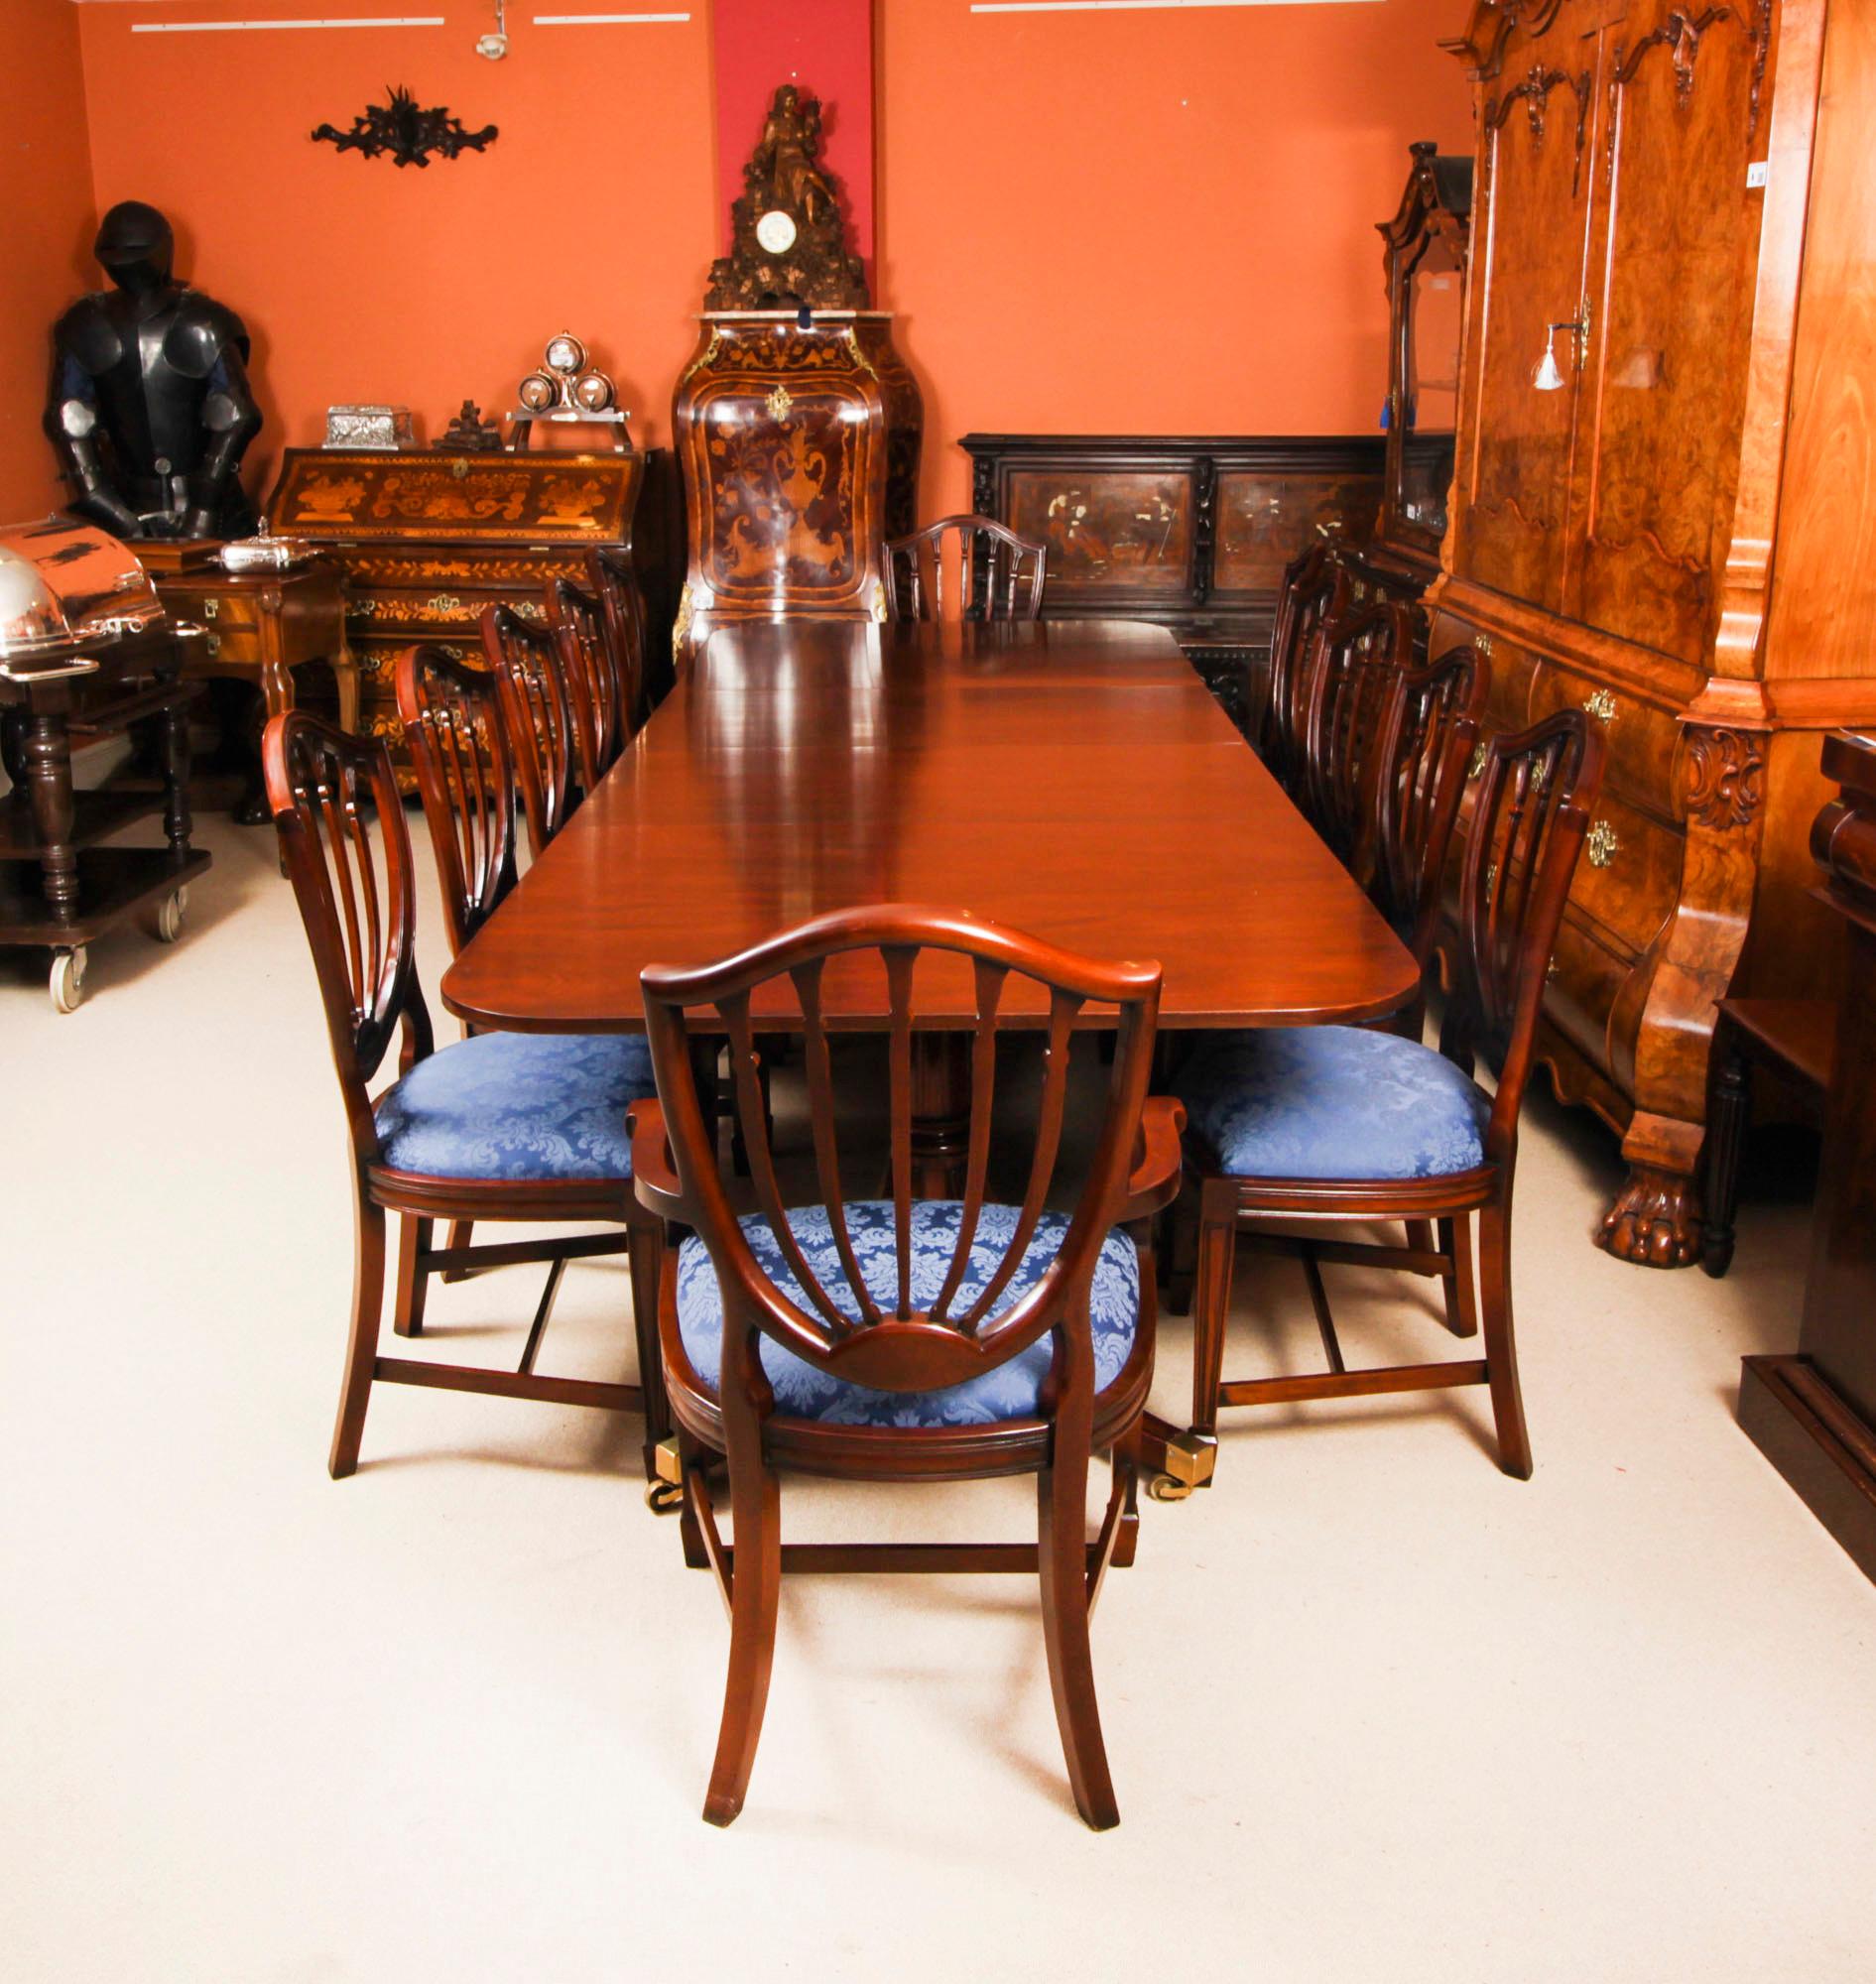 This is  fabulous Vintage dining set comprising a Regency Revival dining table by the master cabinet maker William Tillman, and a set of twelve Hepplewhite Revival  dining chairs, Circa 1980 in date.

The table is made of stunning solid flame